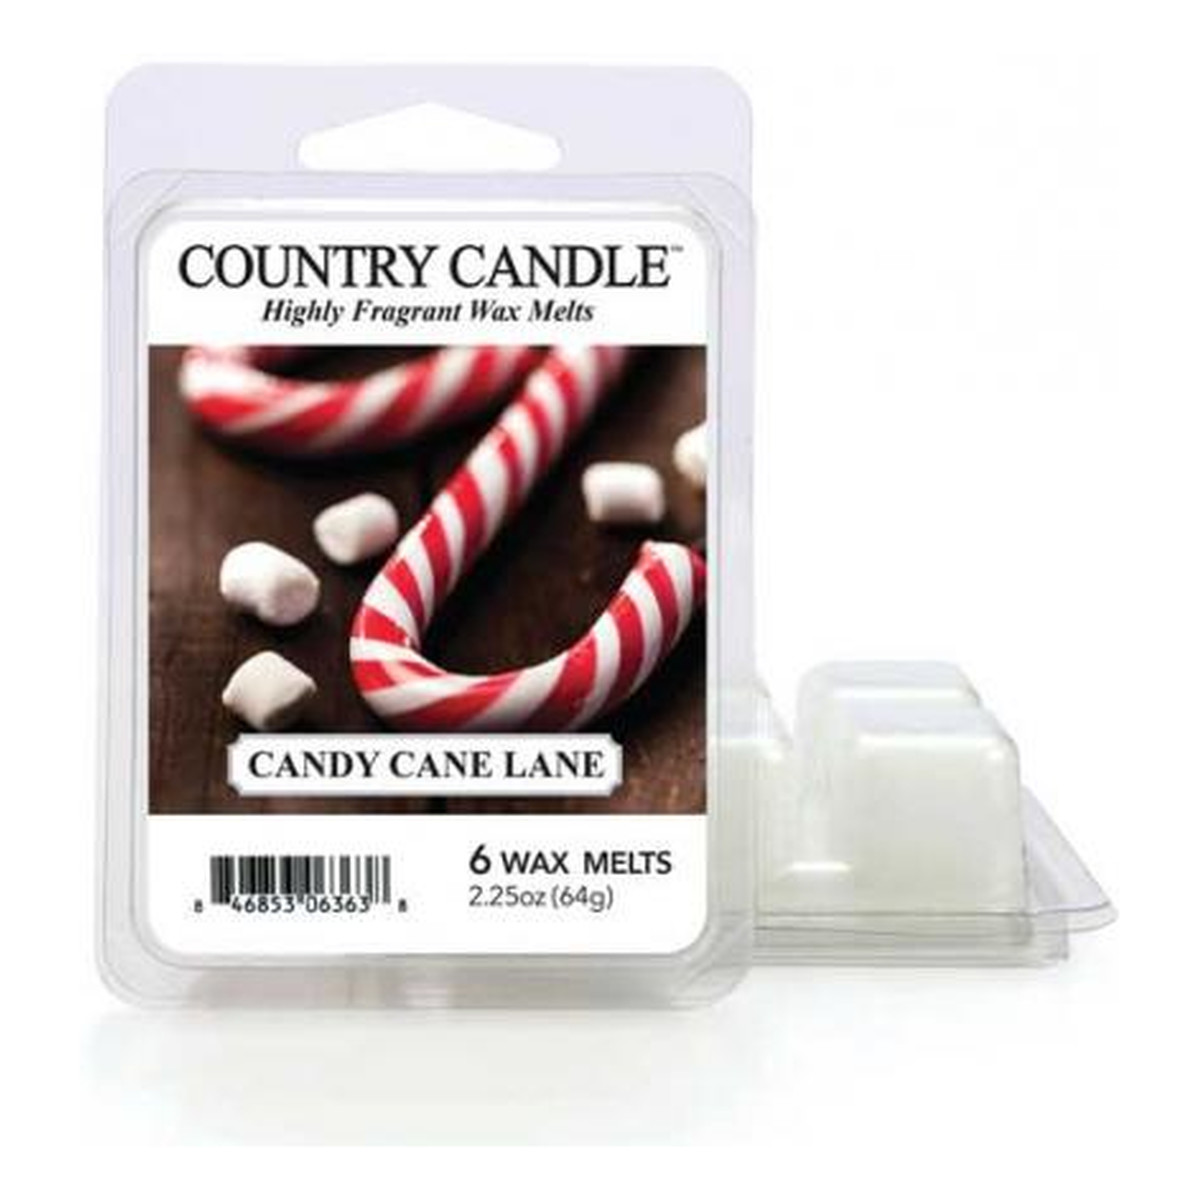 Country Candle Wax wosk zapachowy "potpourri" candy cane lane 64g